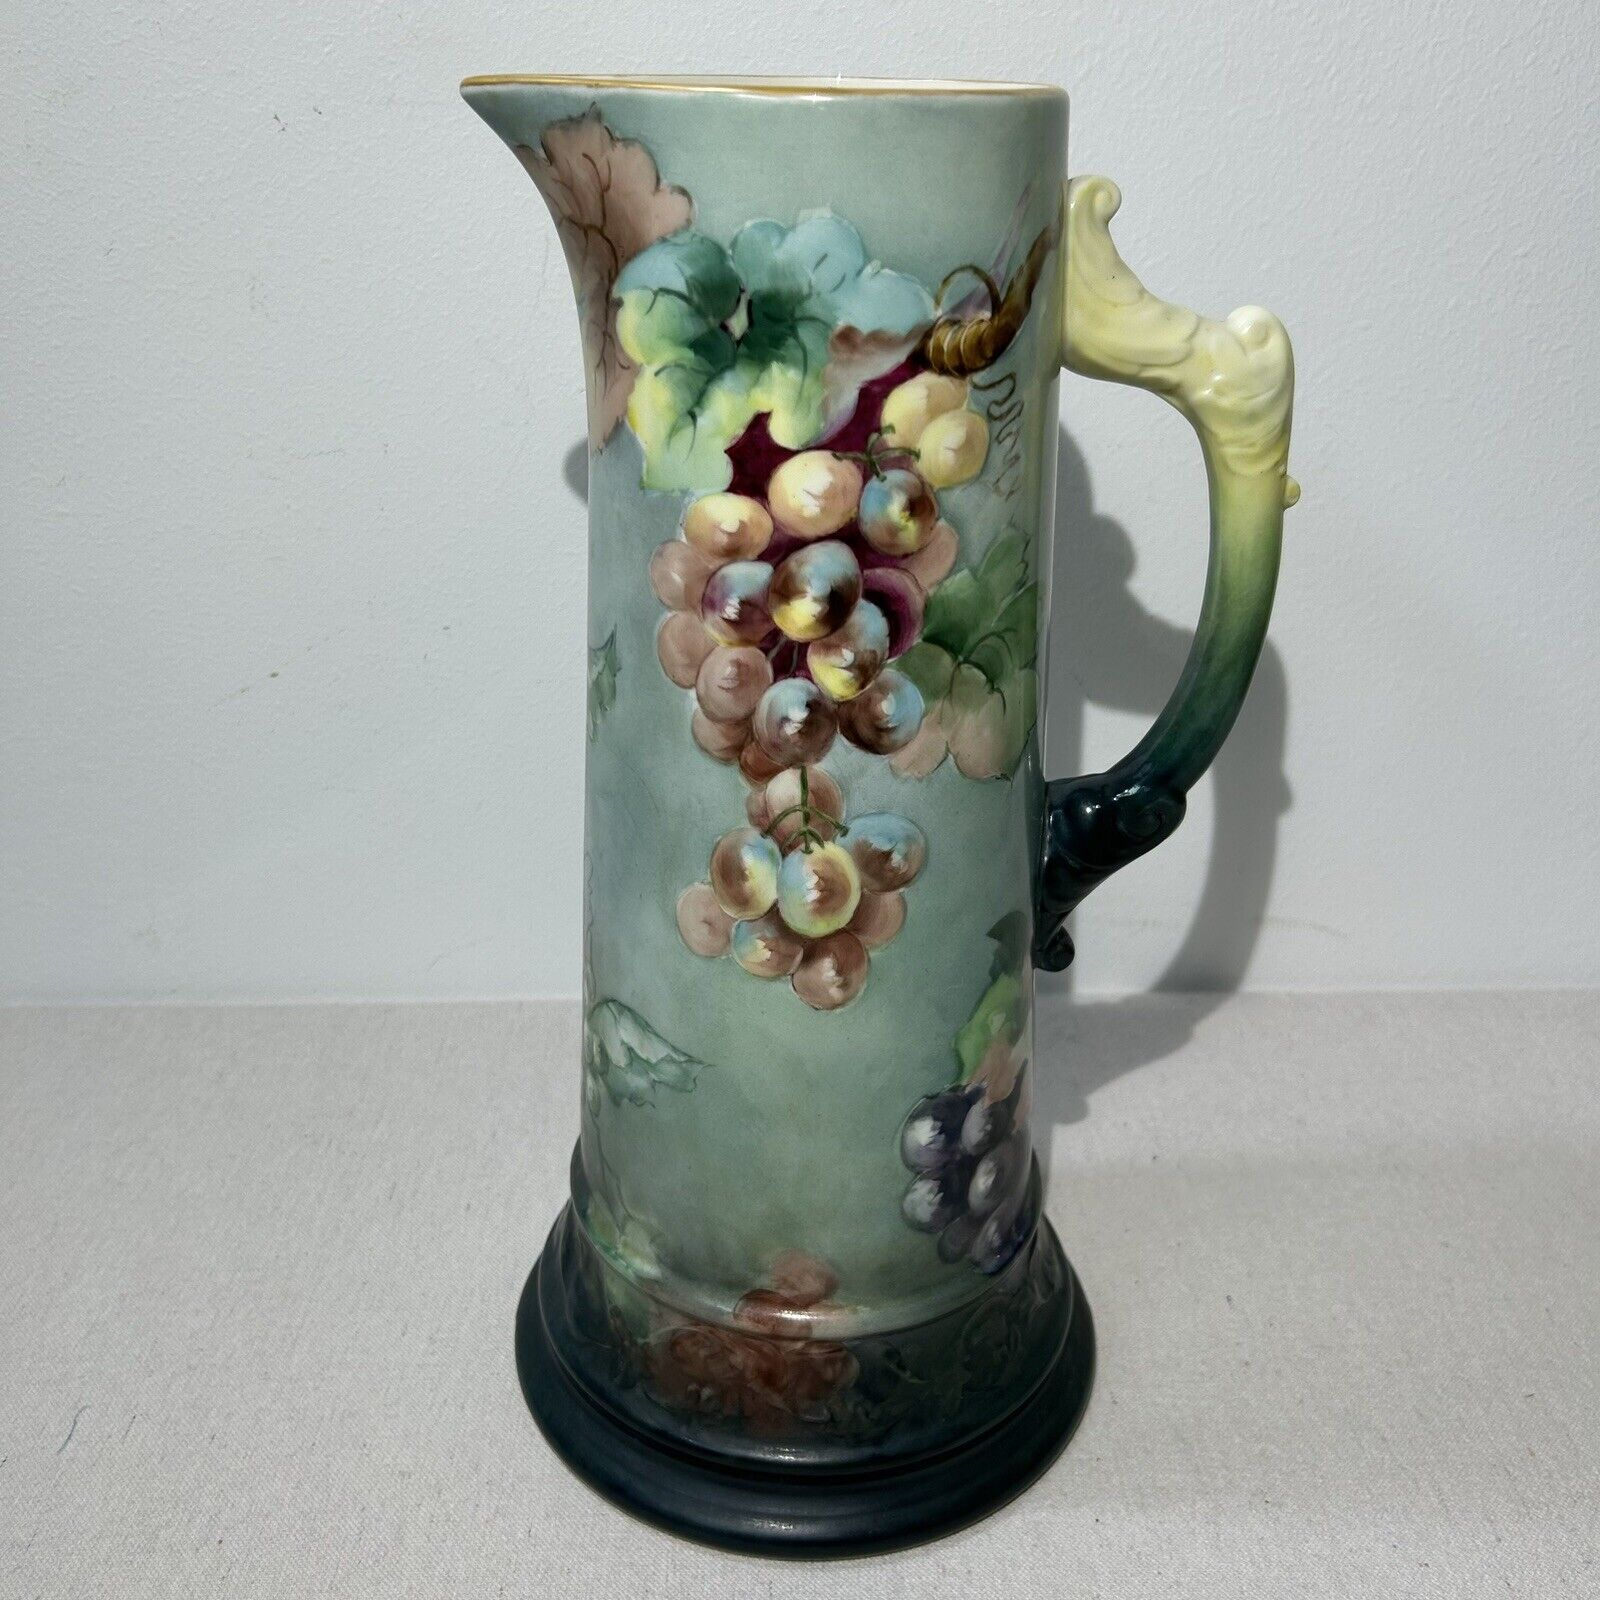 Belleek Willets Hand Painted Tankard Pitcher Grapes & Greenery Gold Trim